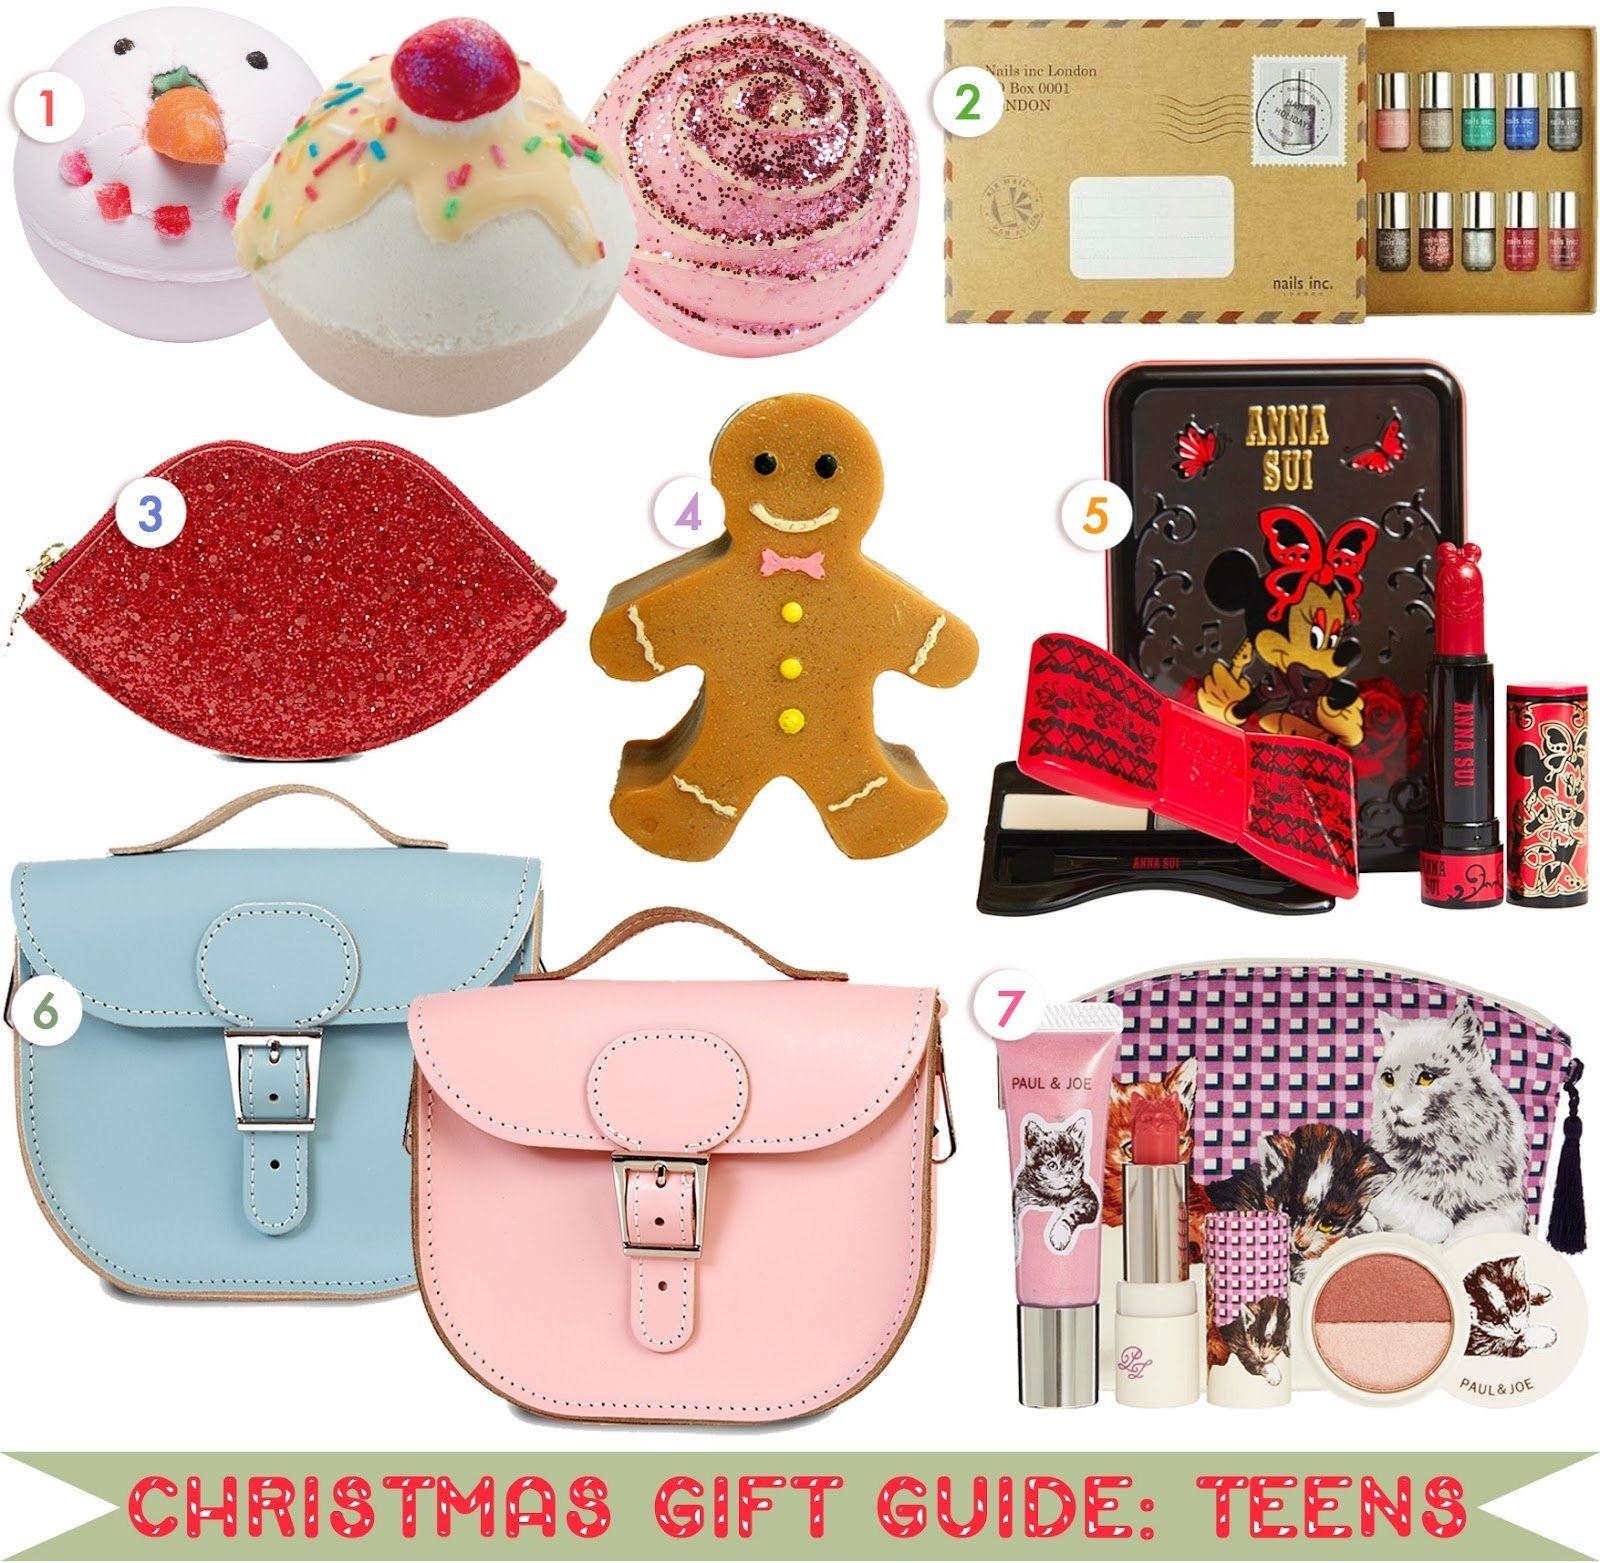 10 Attractive Christmas Gift Ideas For Sisters christmas gift guide teens temporarysecretary uk fashion 1 2022